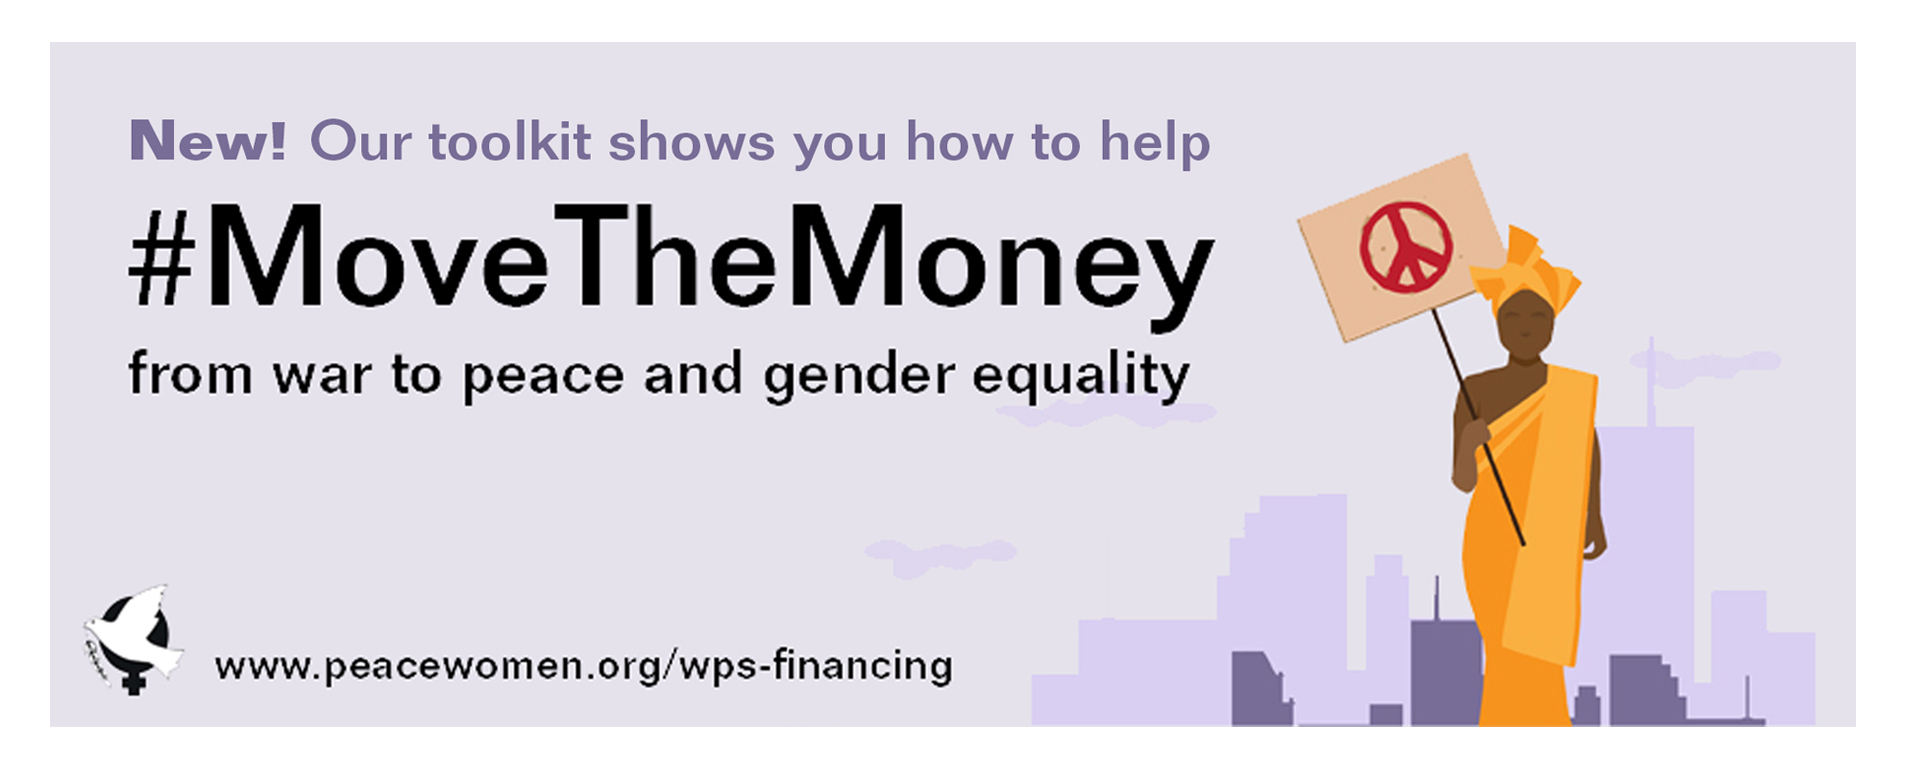 Learn how to help #MoveTheMoney from war to peace!